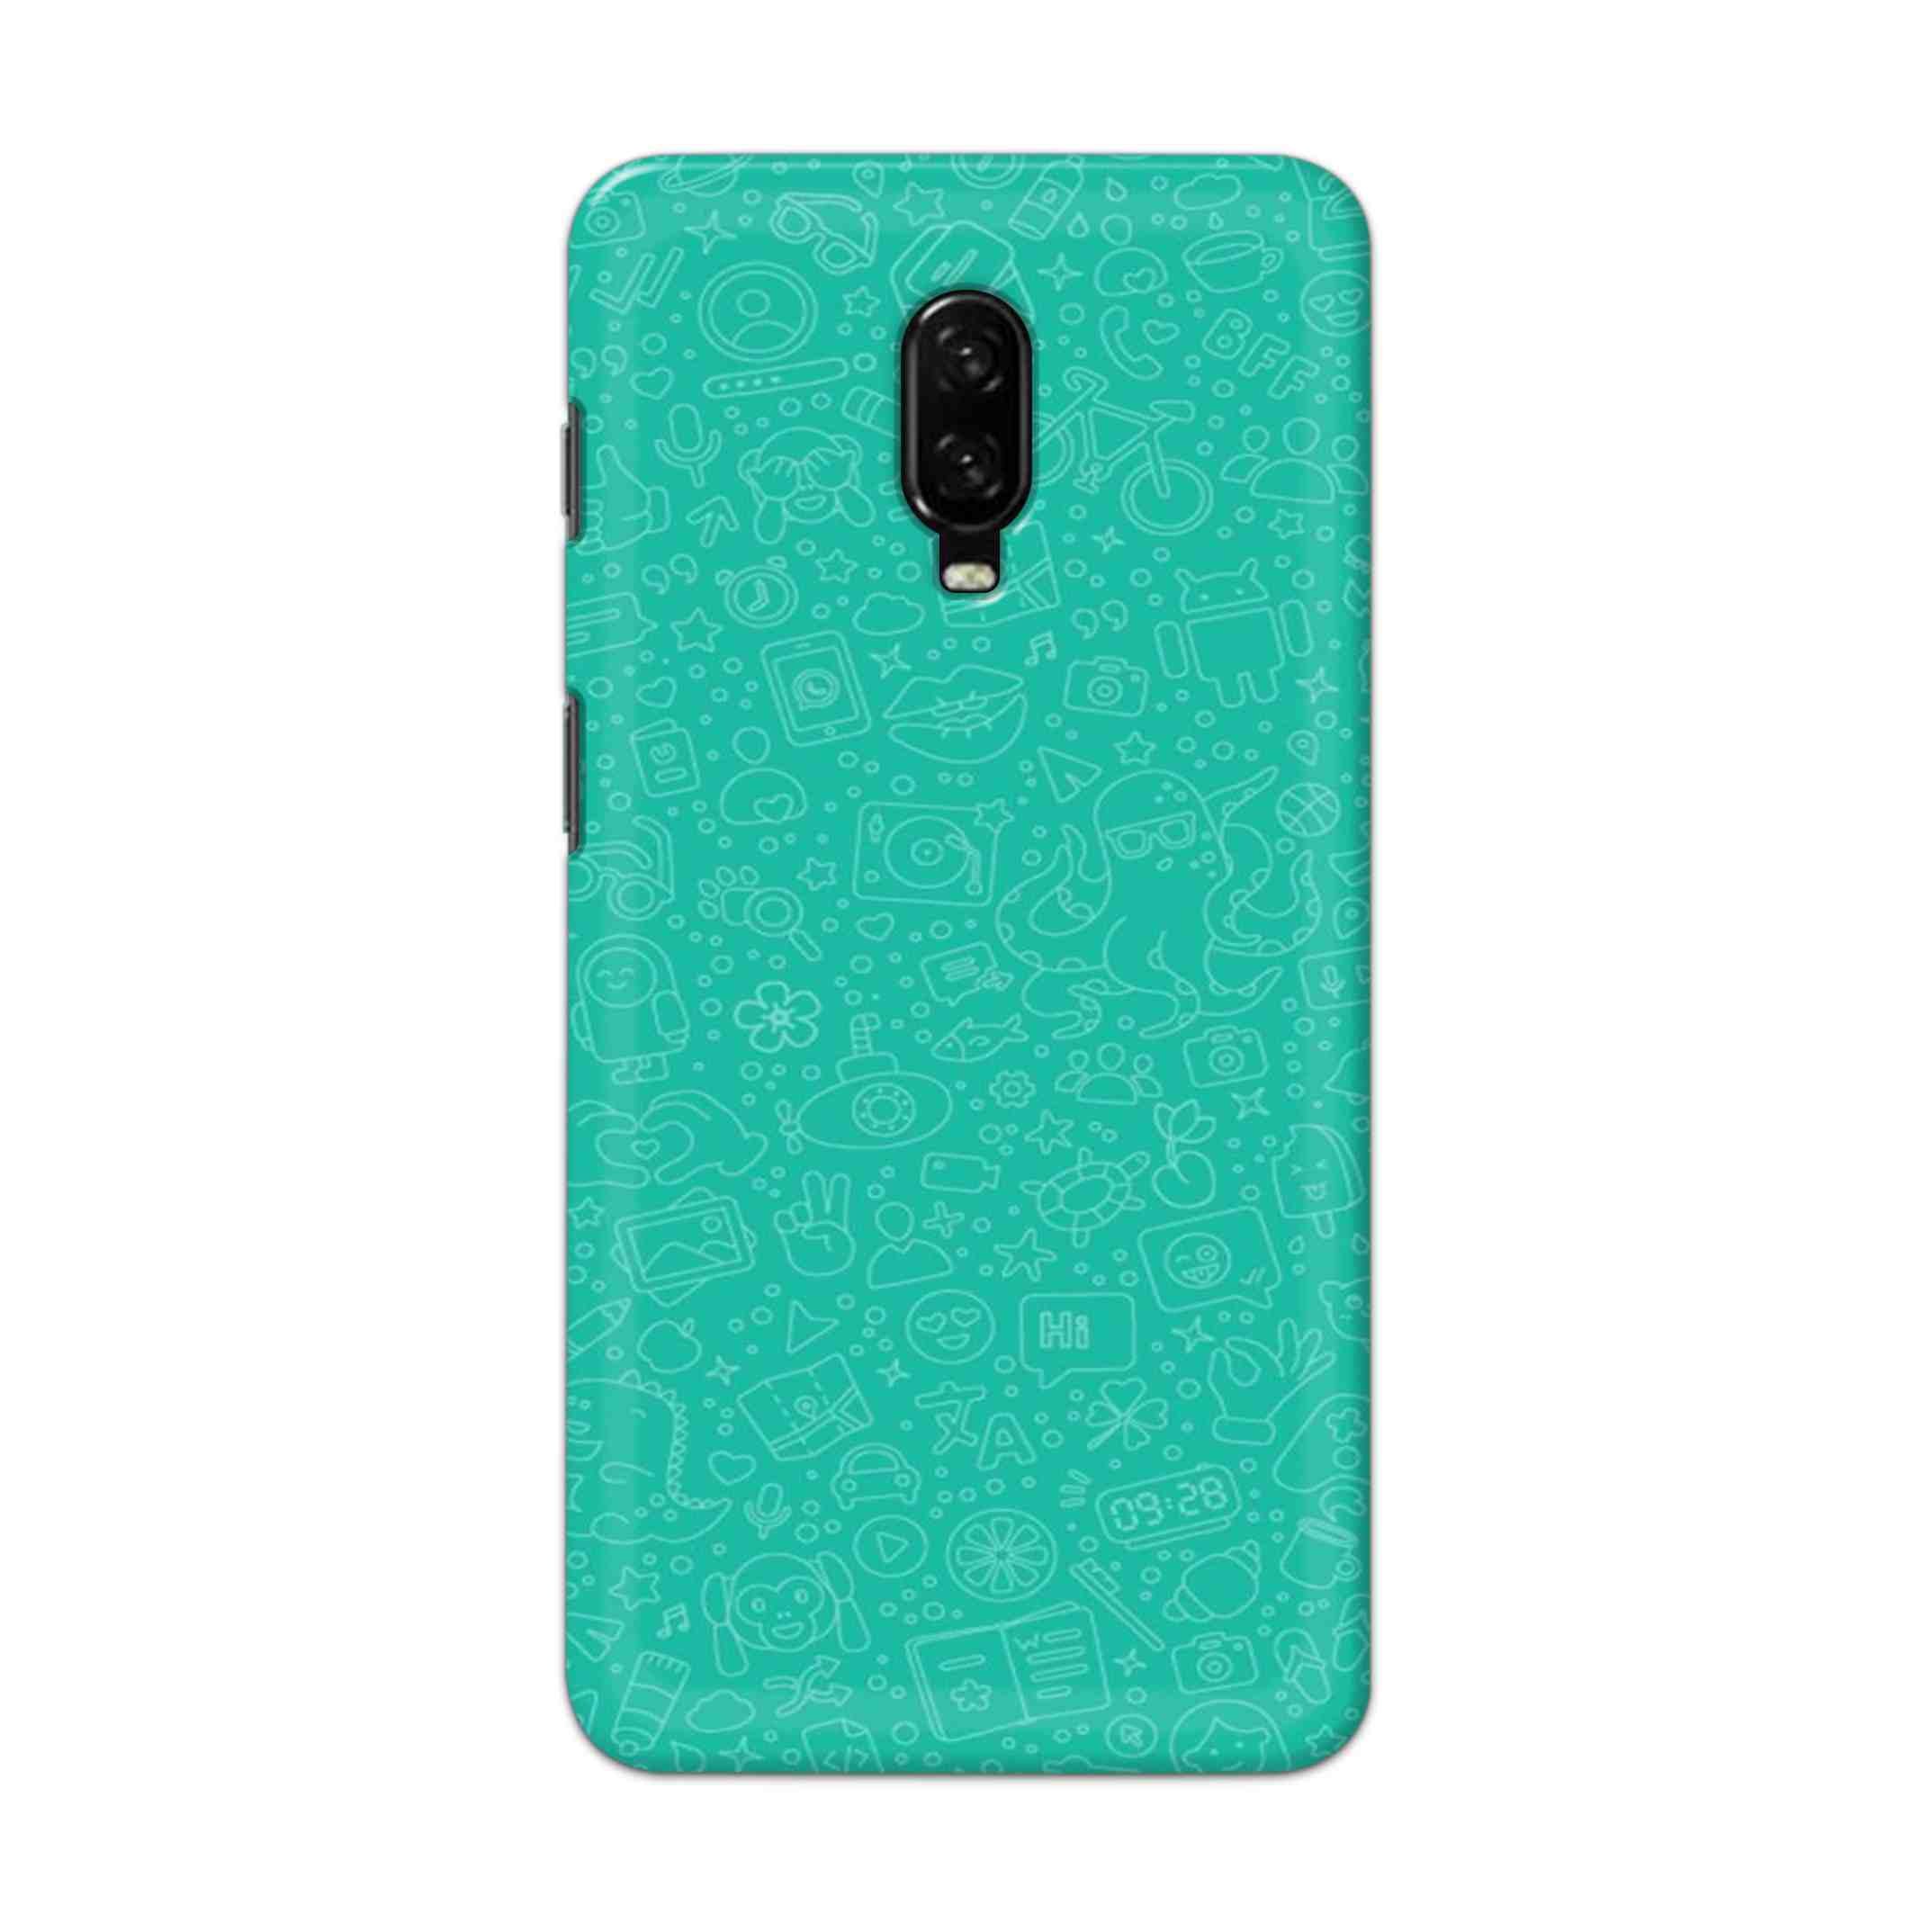 Buy Whatsapp Hard Back Mobile Phone Case Cover For OnePlus 6T Online